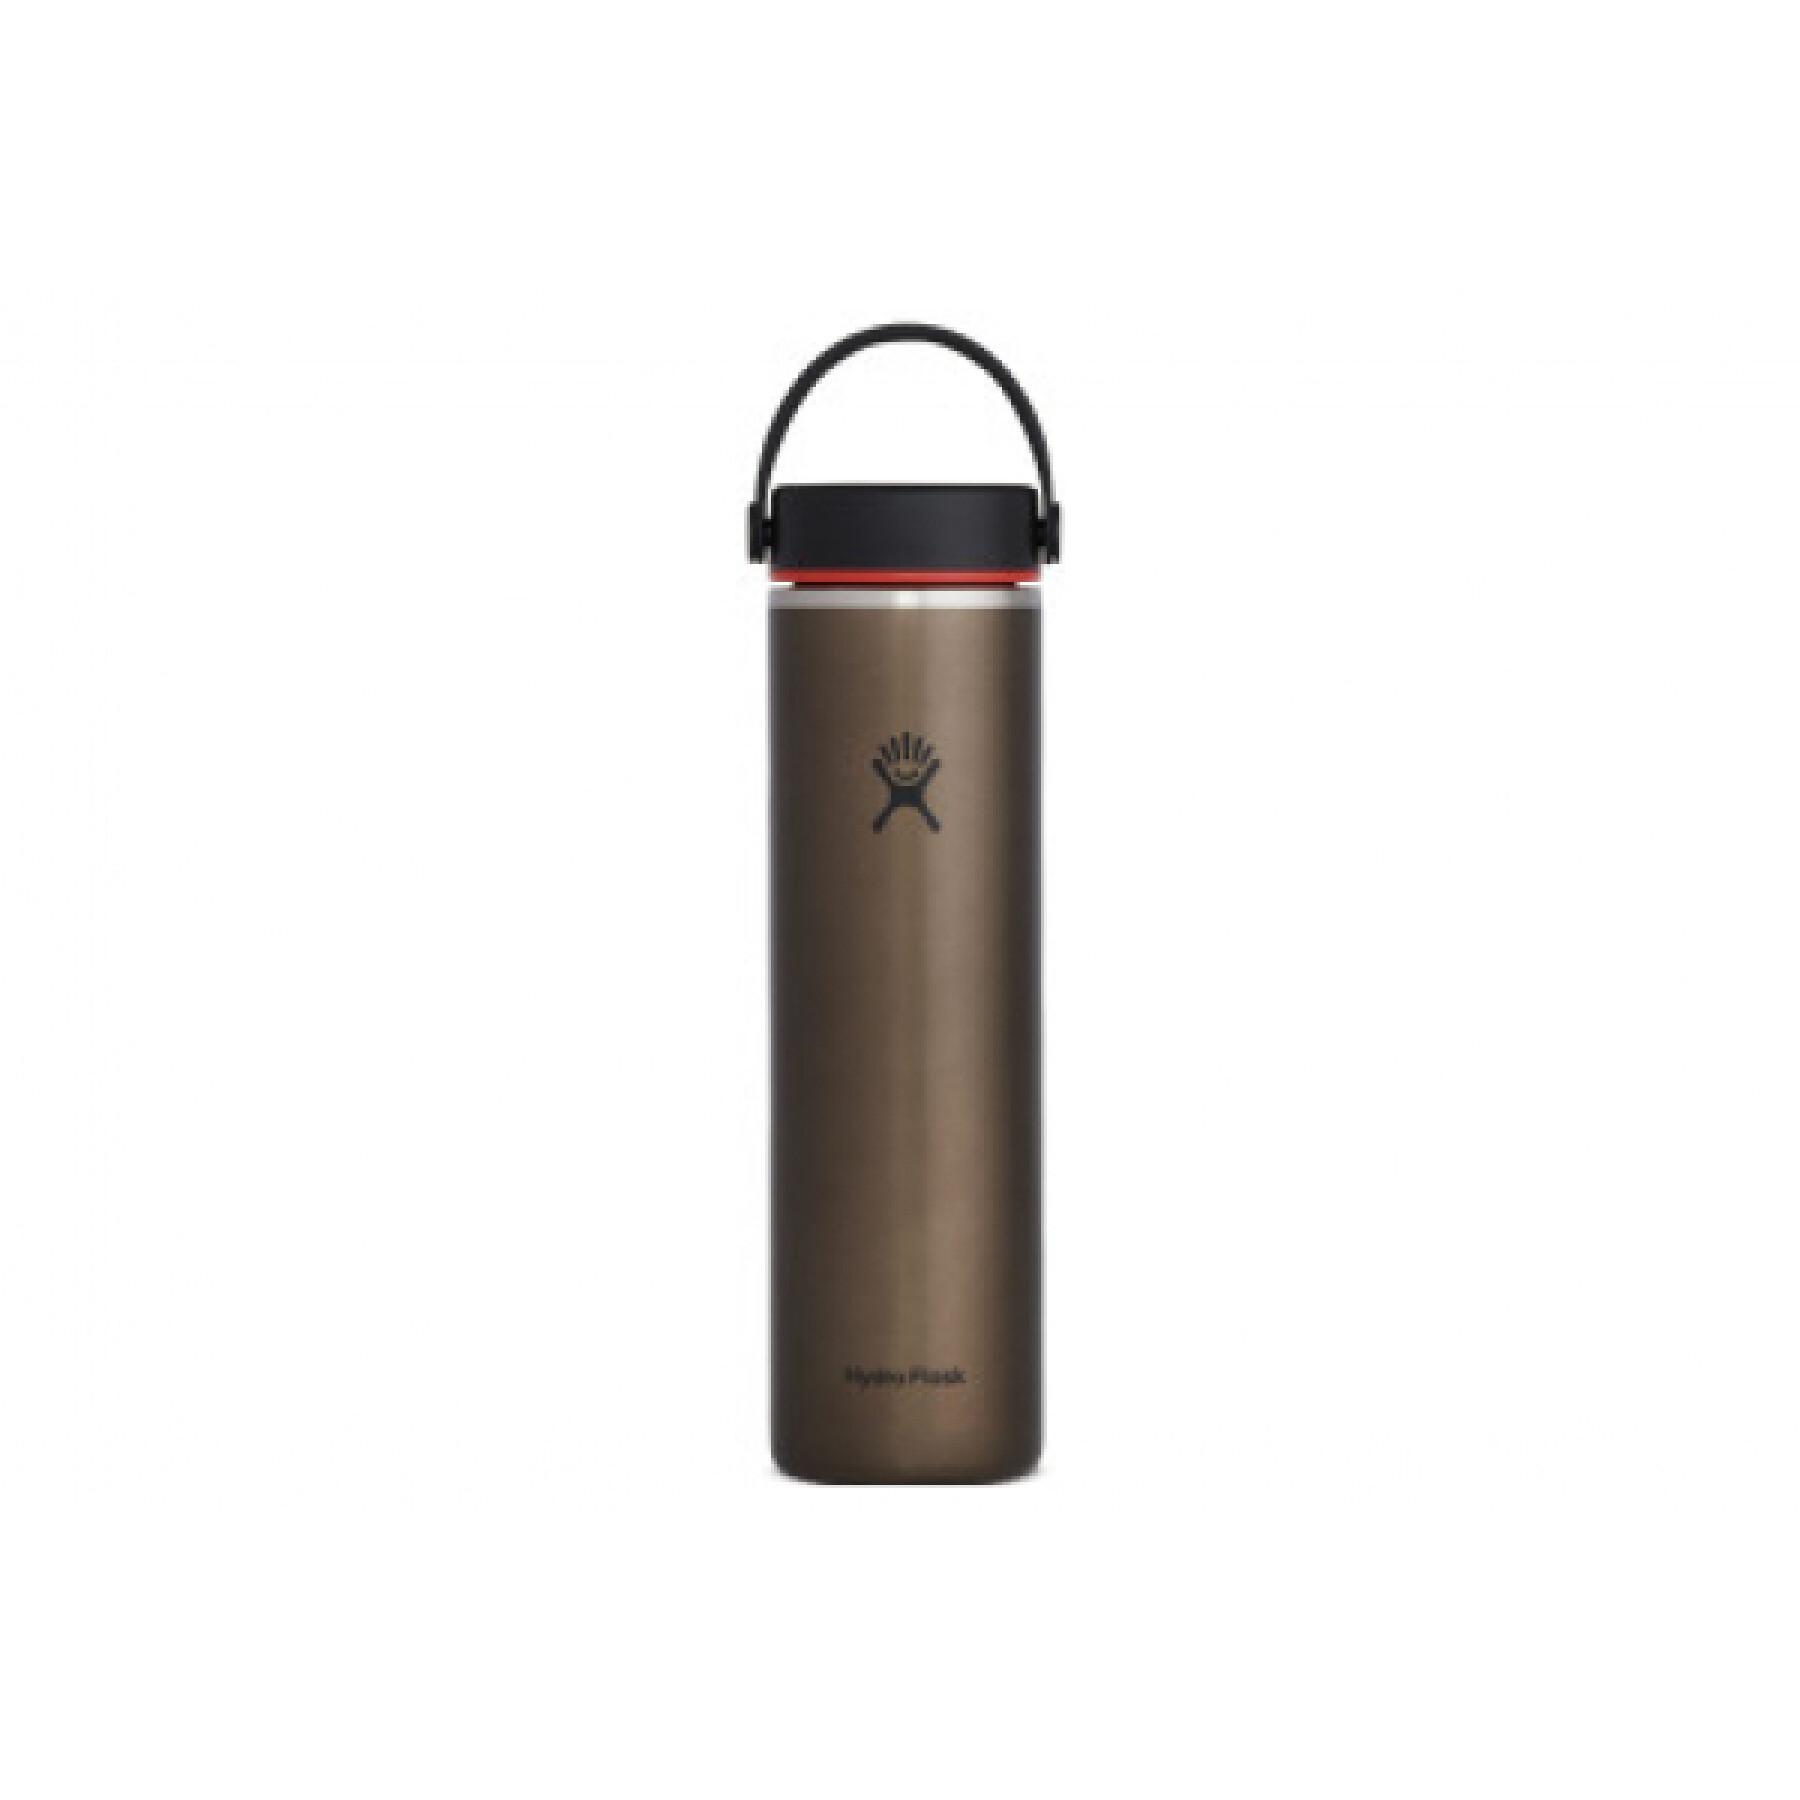 Standard-Thermoskanne Hydro Flask with mouth standard lex cap 24 oz